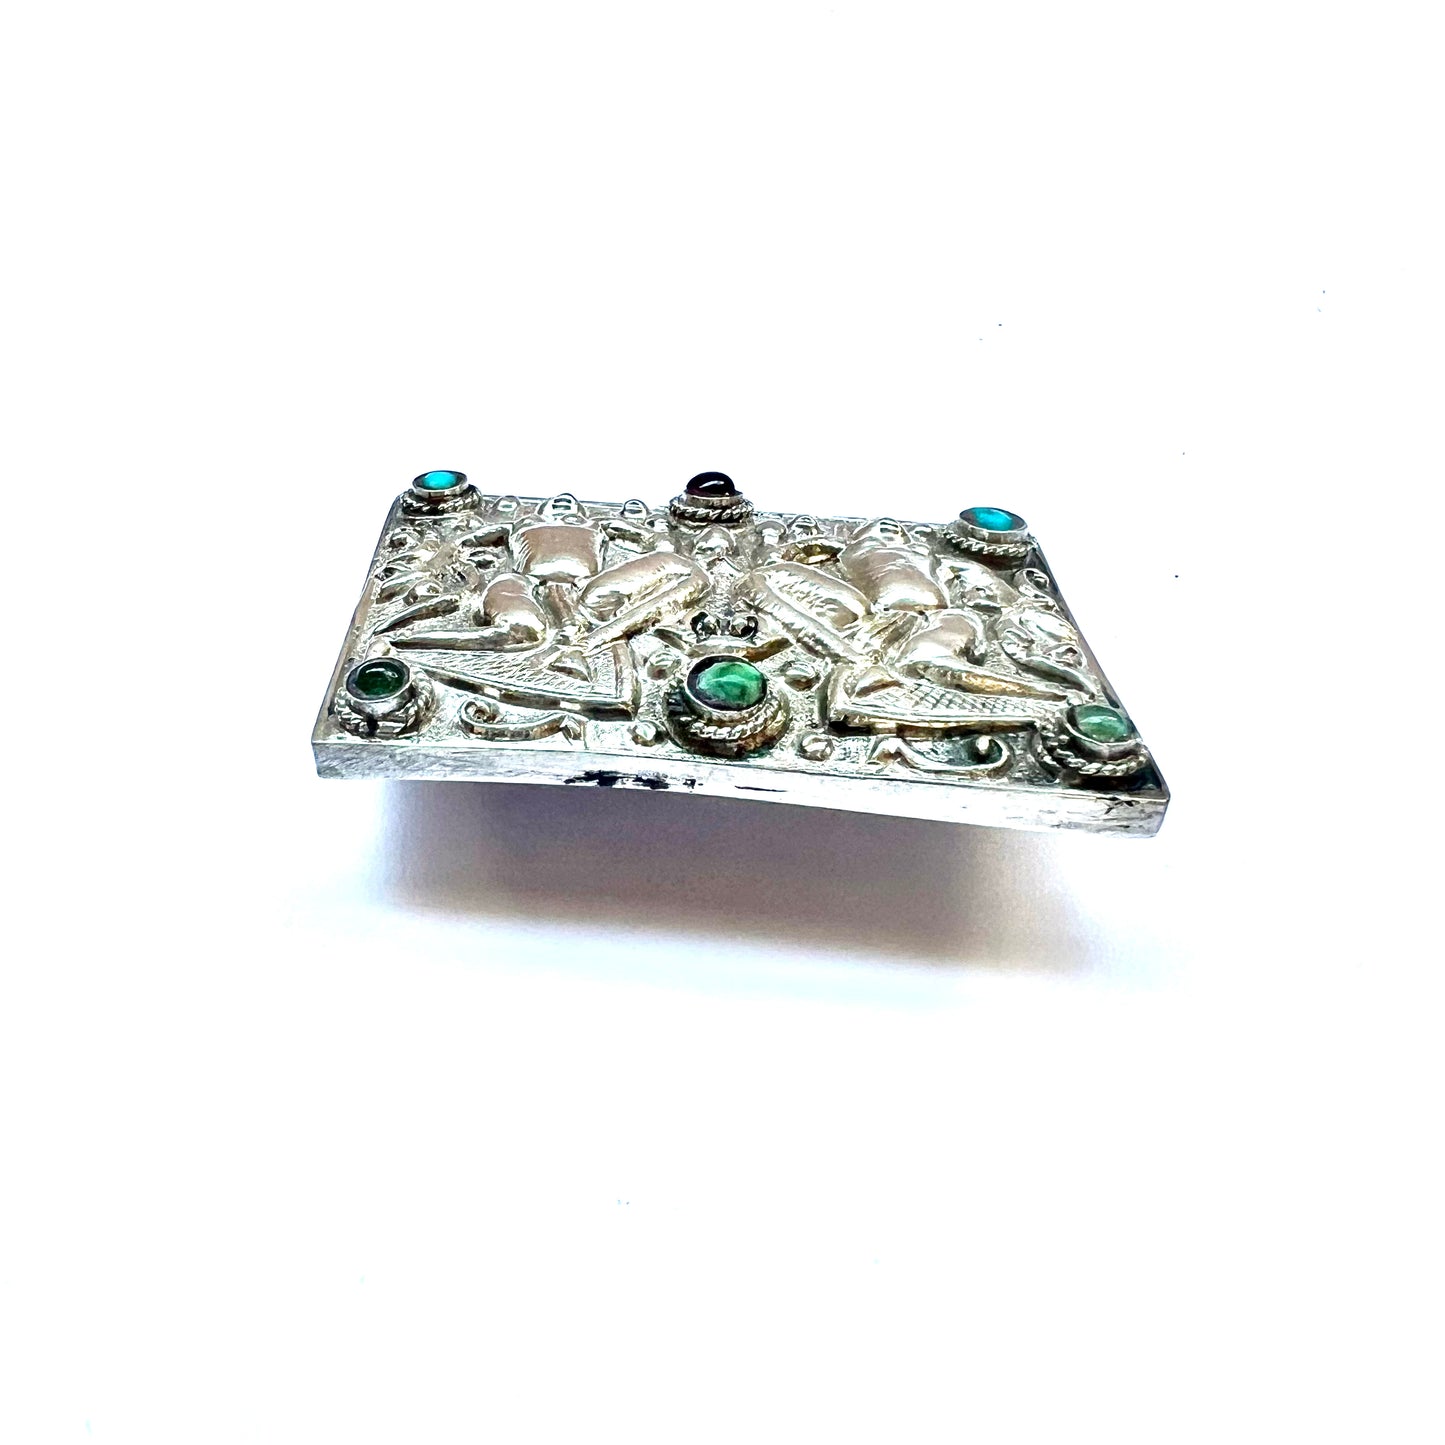 Antique Tibetan silver brooch with semi-precious stones and repousse deity motifs